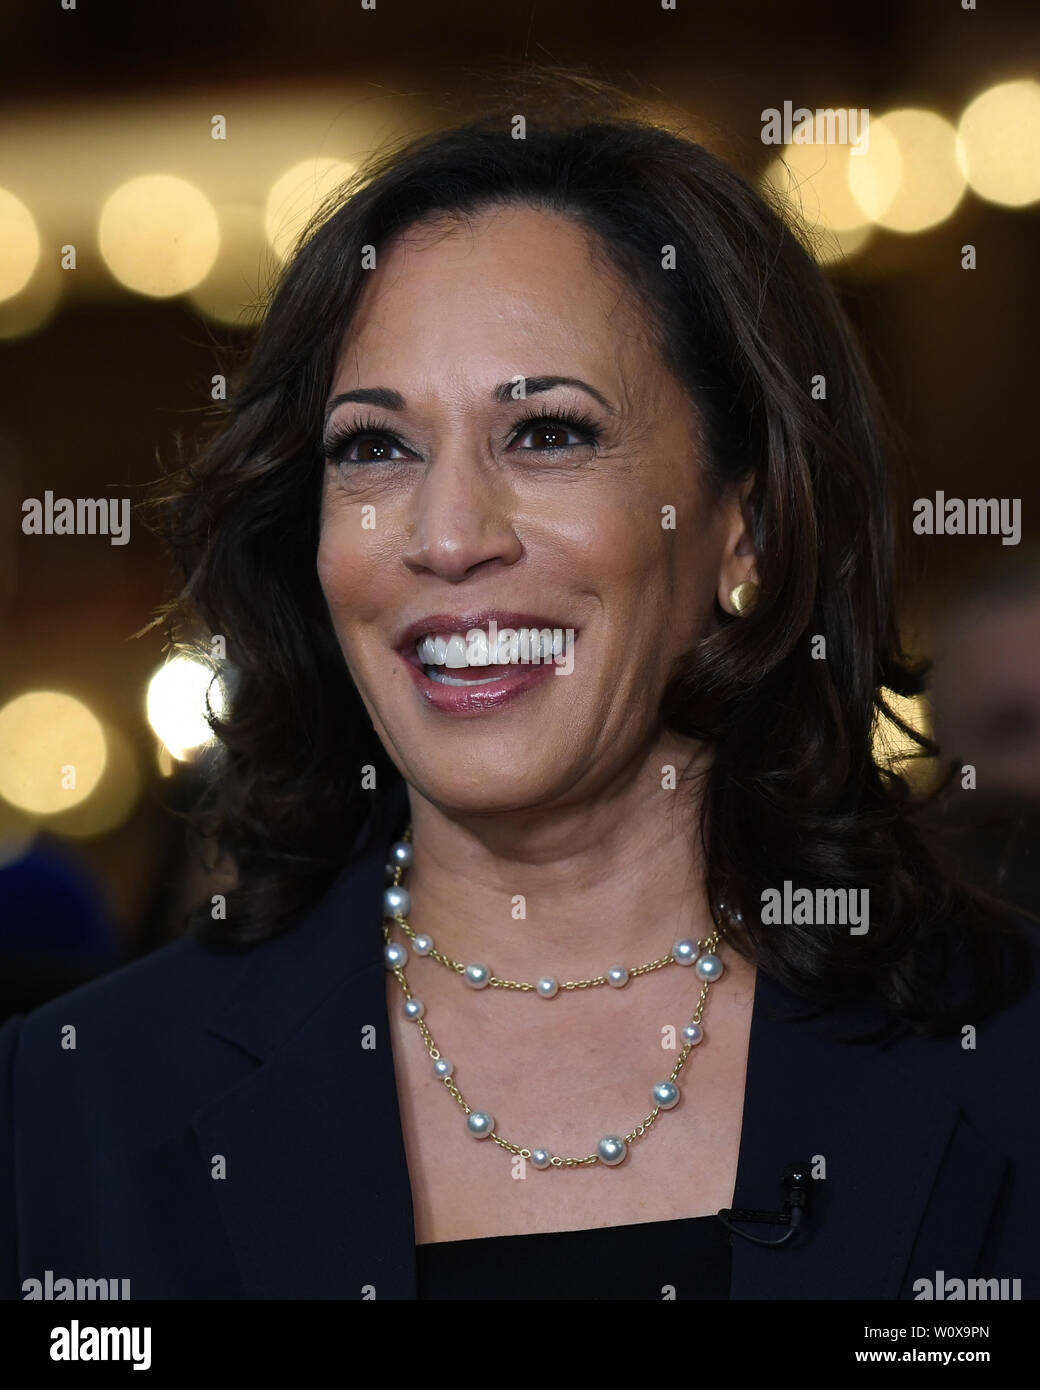 Miami, FL, USA. 27th June, 2019. Senator Kamala Harris in the spin room following the 2020 Democratic Party presidential debates held at The Adrienne Arsht Center on June 27, 2019 in Miami Florida. Credit: Mpi04/Media Punch ***No Ny Newspapers***/Alamy Live News Stock Photo